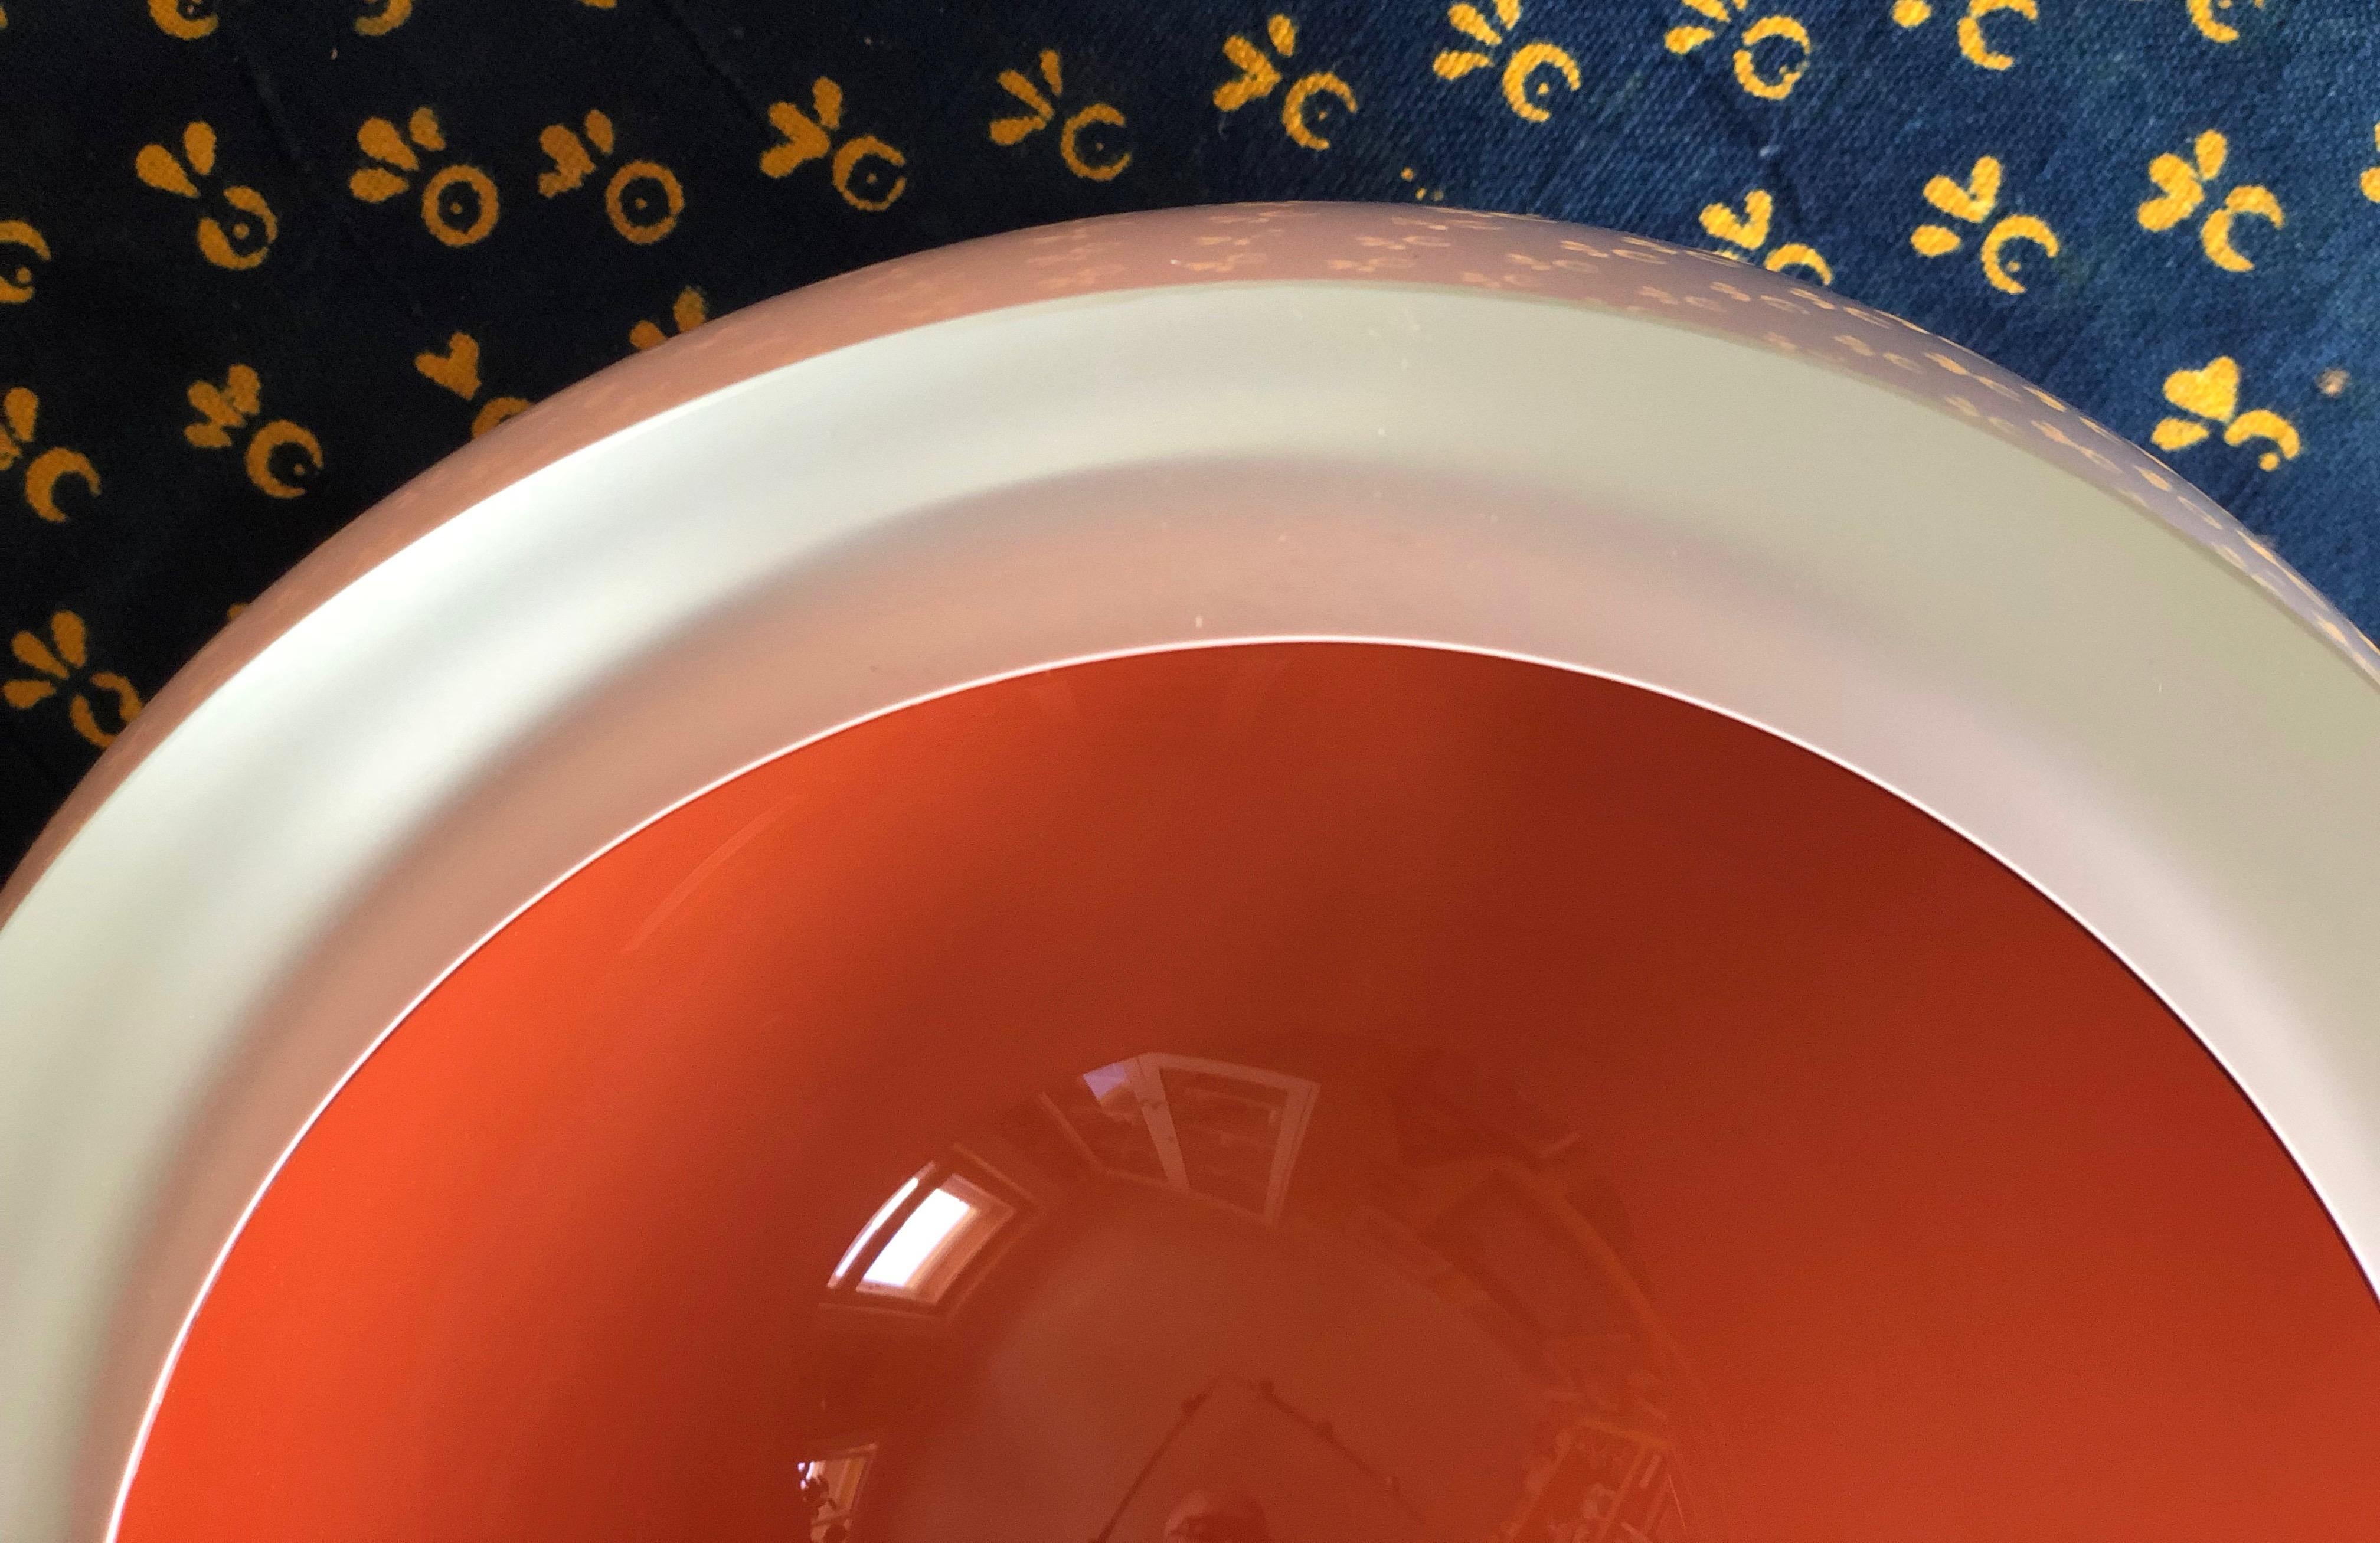 Contemporary Studio Glass Bowl in Coral Color, Made in the Czech Republic, 2010 For Sale 4